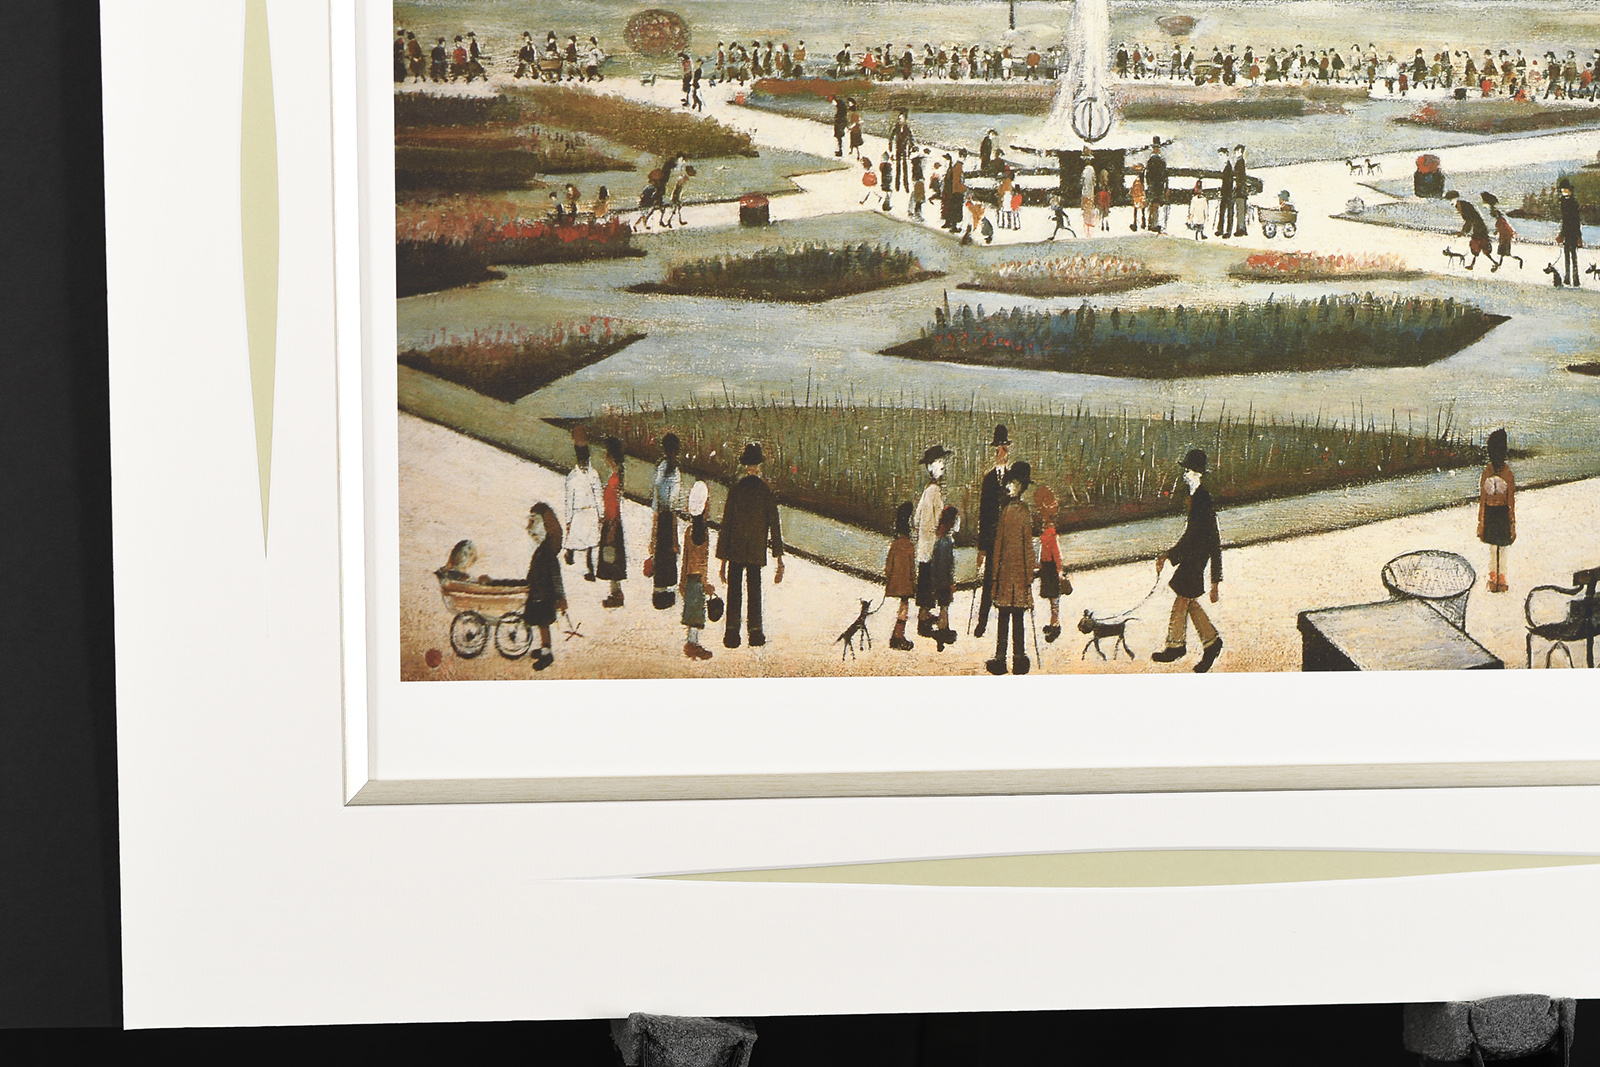 Limited Edition L.S. Lowry Titled "Piccadilly Gardens" - Image 8 of 9